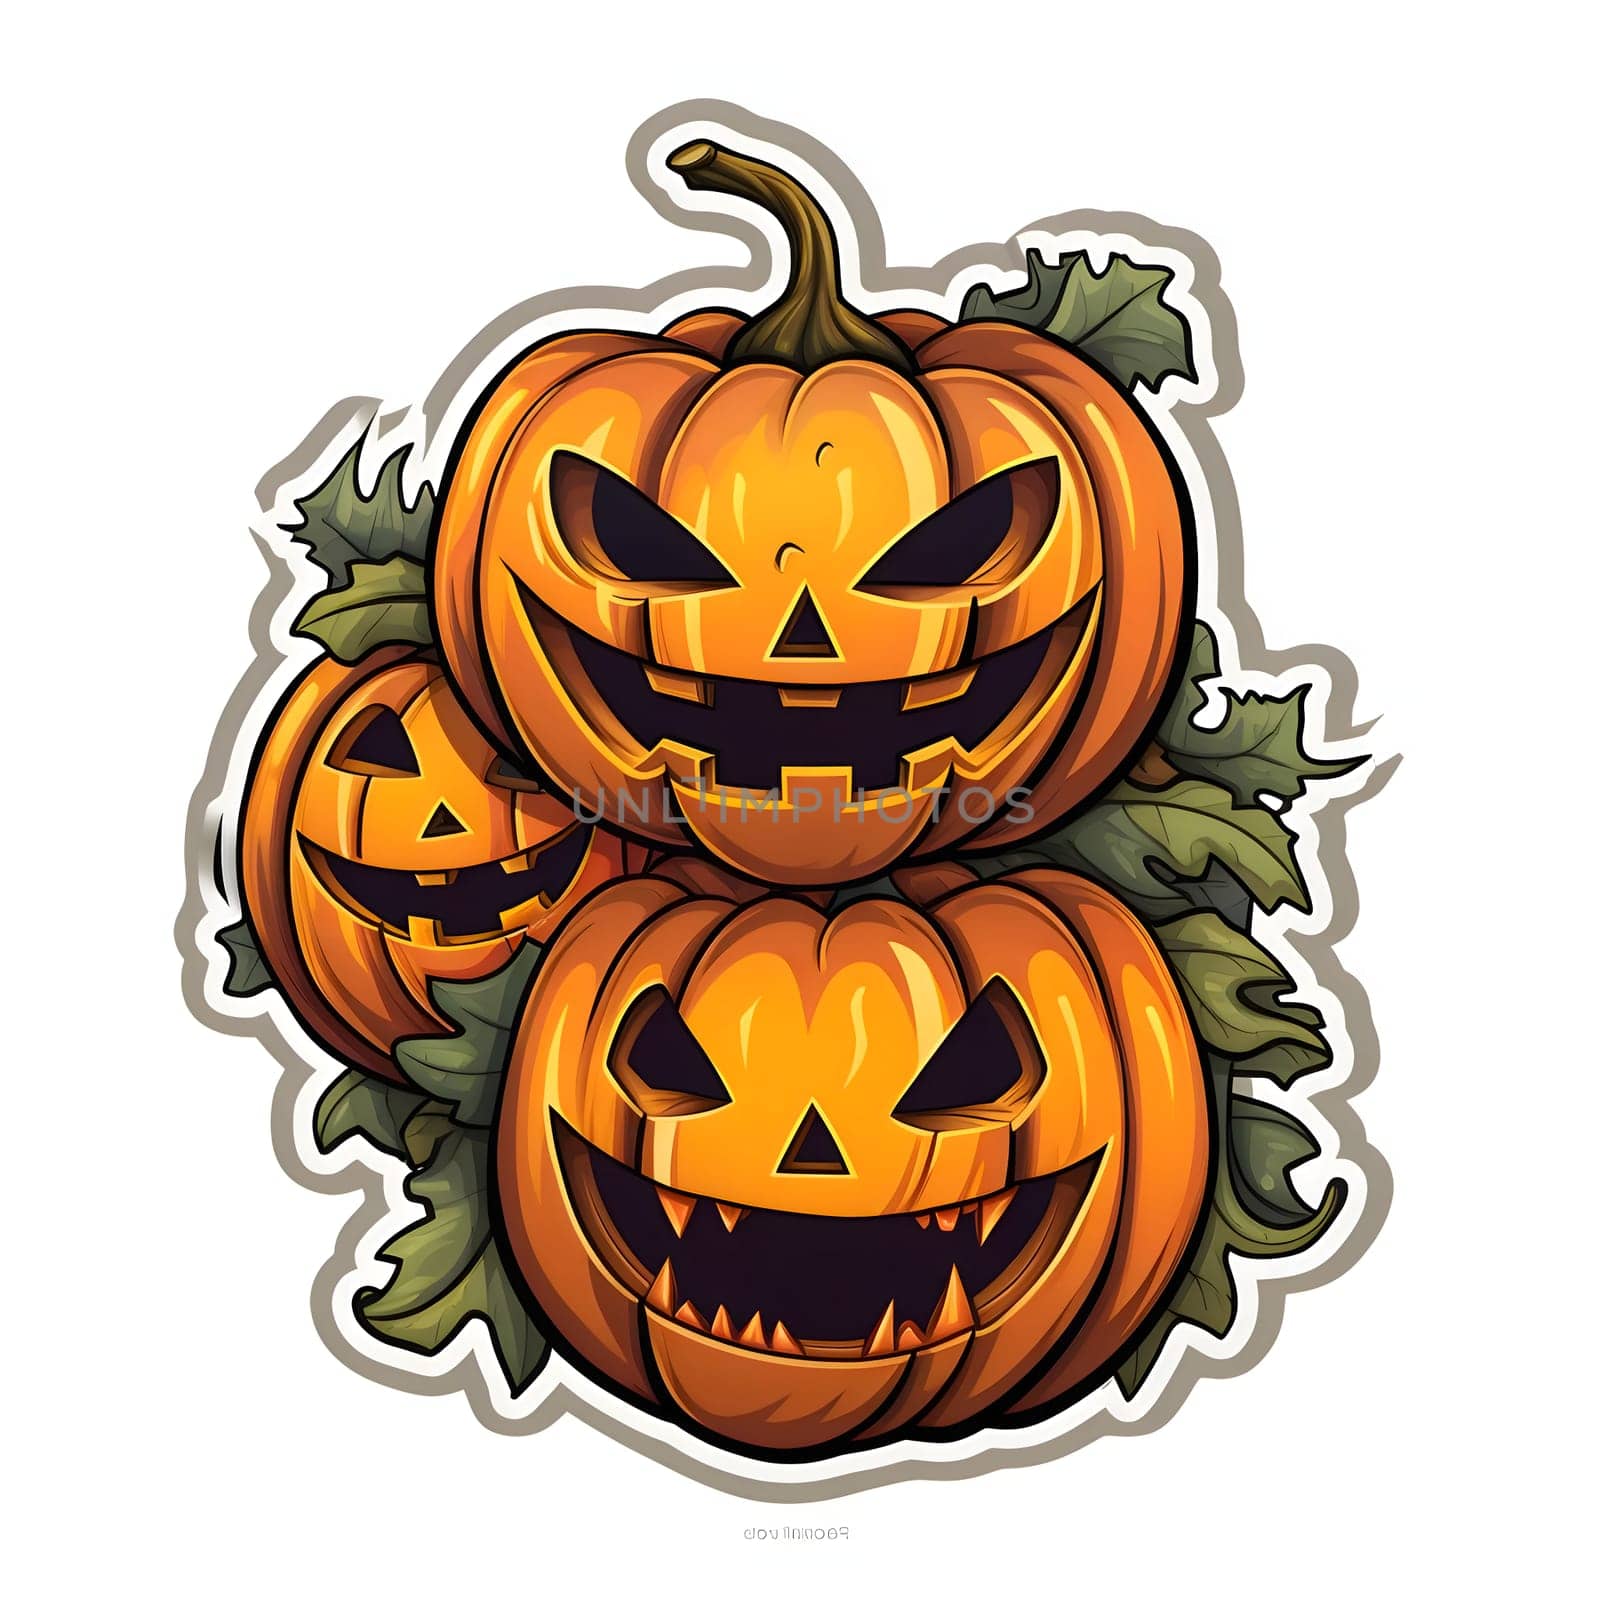 Sticker three jack-o-lantern pumpkins, Halloween image on a white isolated background. Atmosphere of darkness and fear.